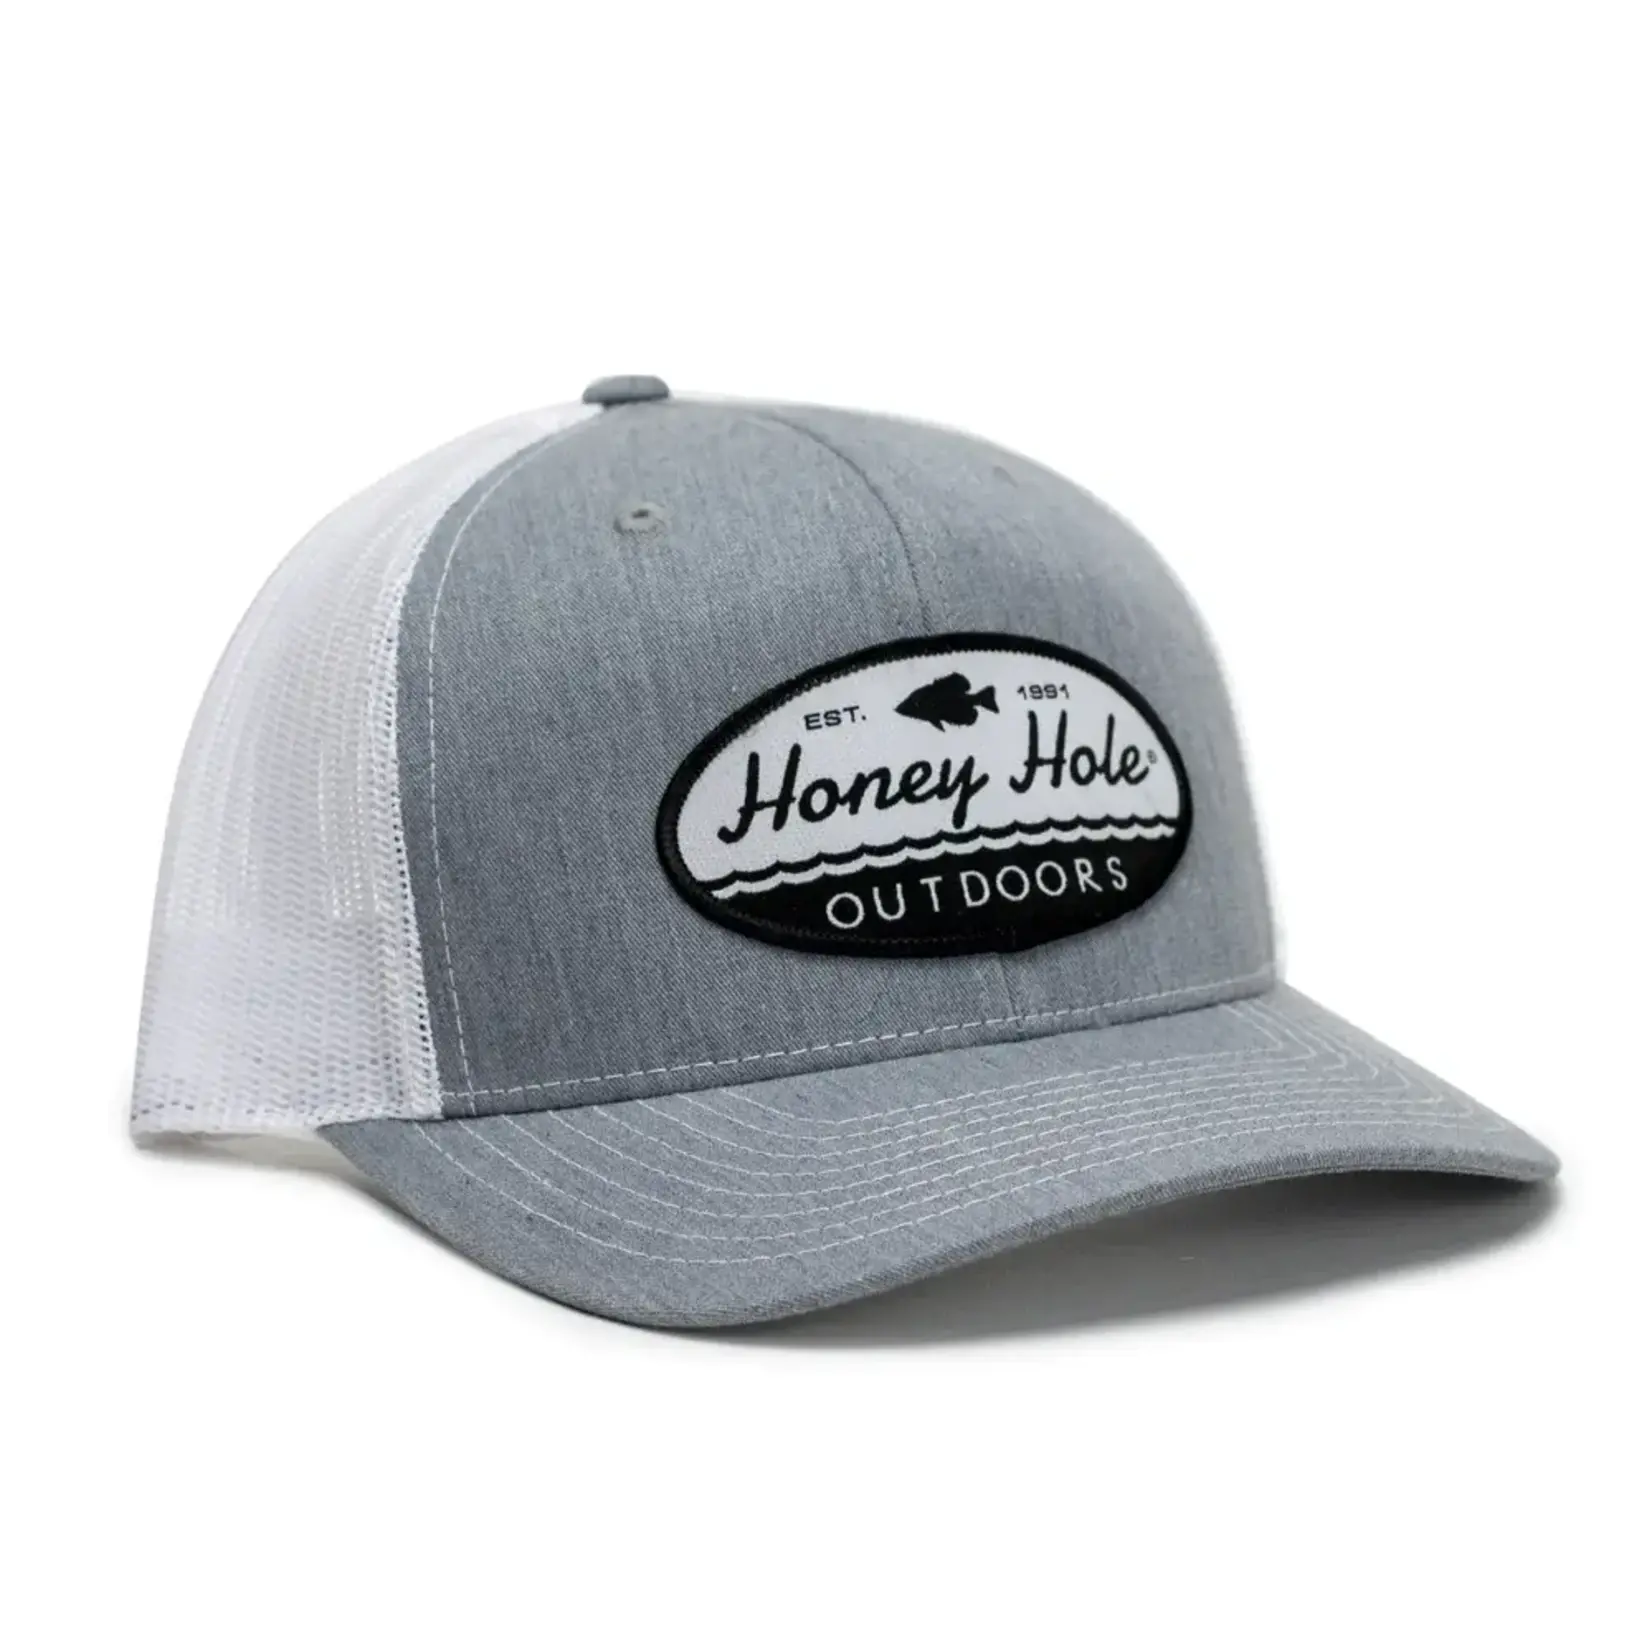 Honey Hole Outdoors Honey Hole Outdoors Oval Crappie Patch Snapback Hat